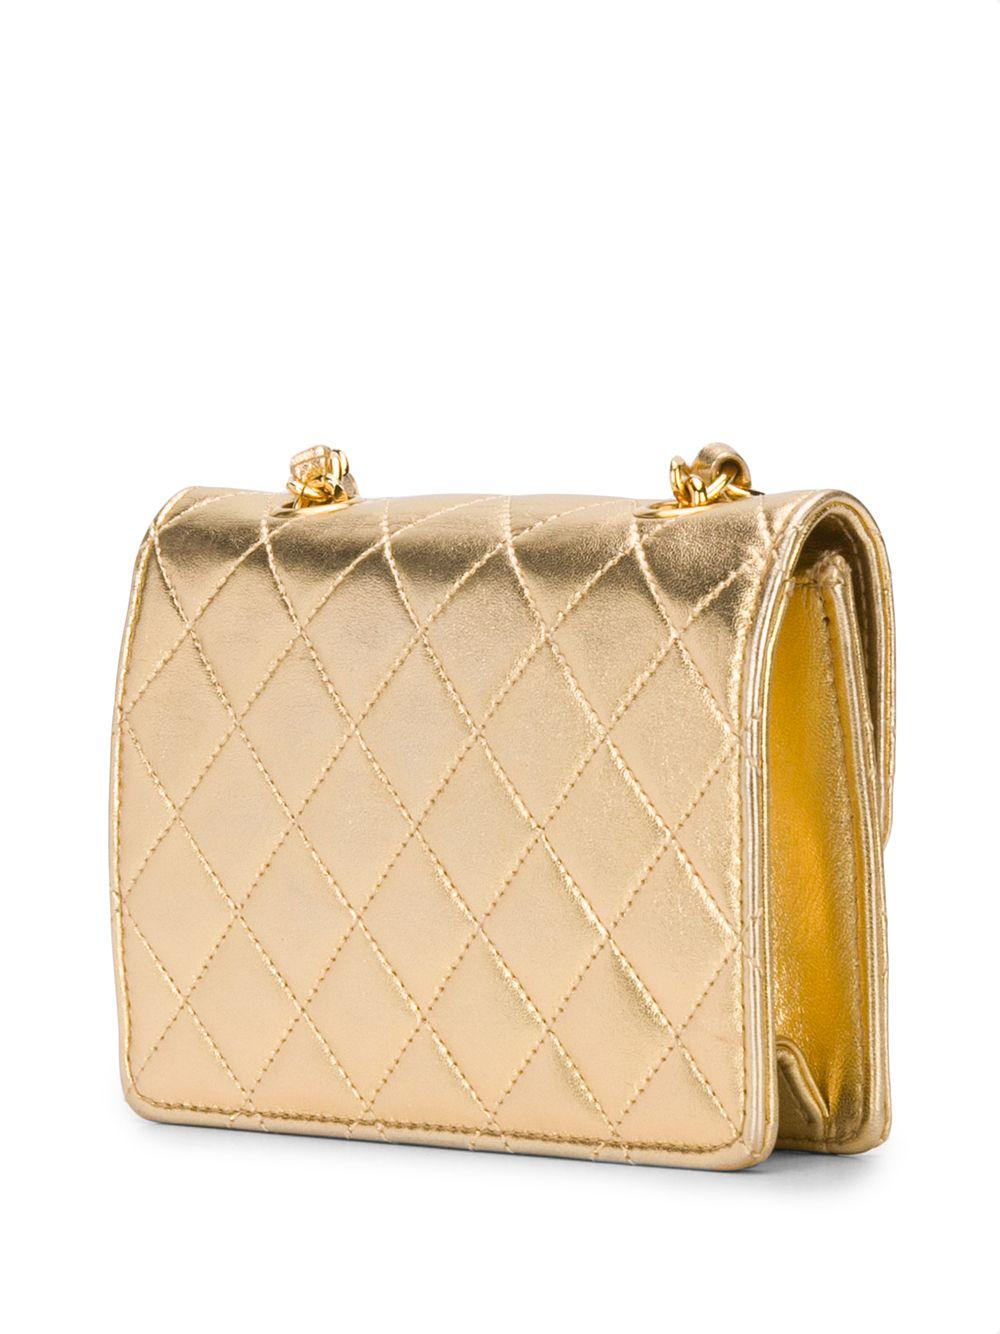 Chanel Metallic Gold Mini Crossbody Bag In Excellent Condition In London, GB